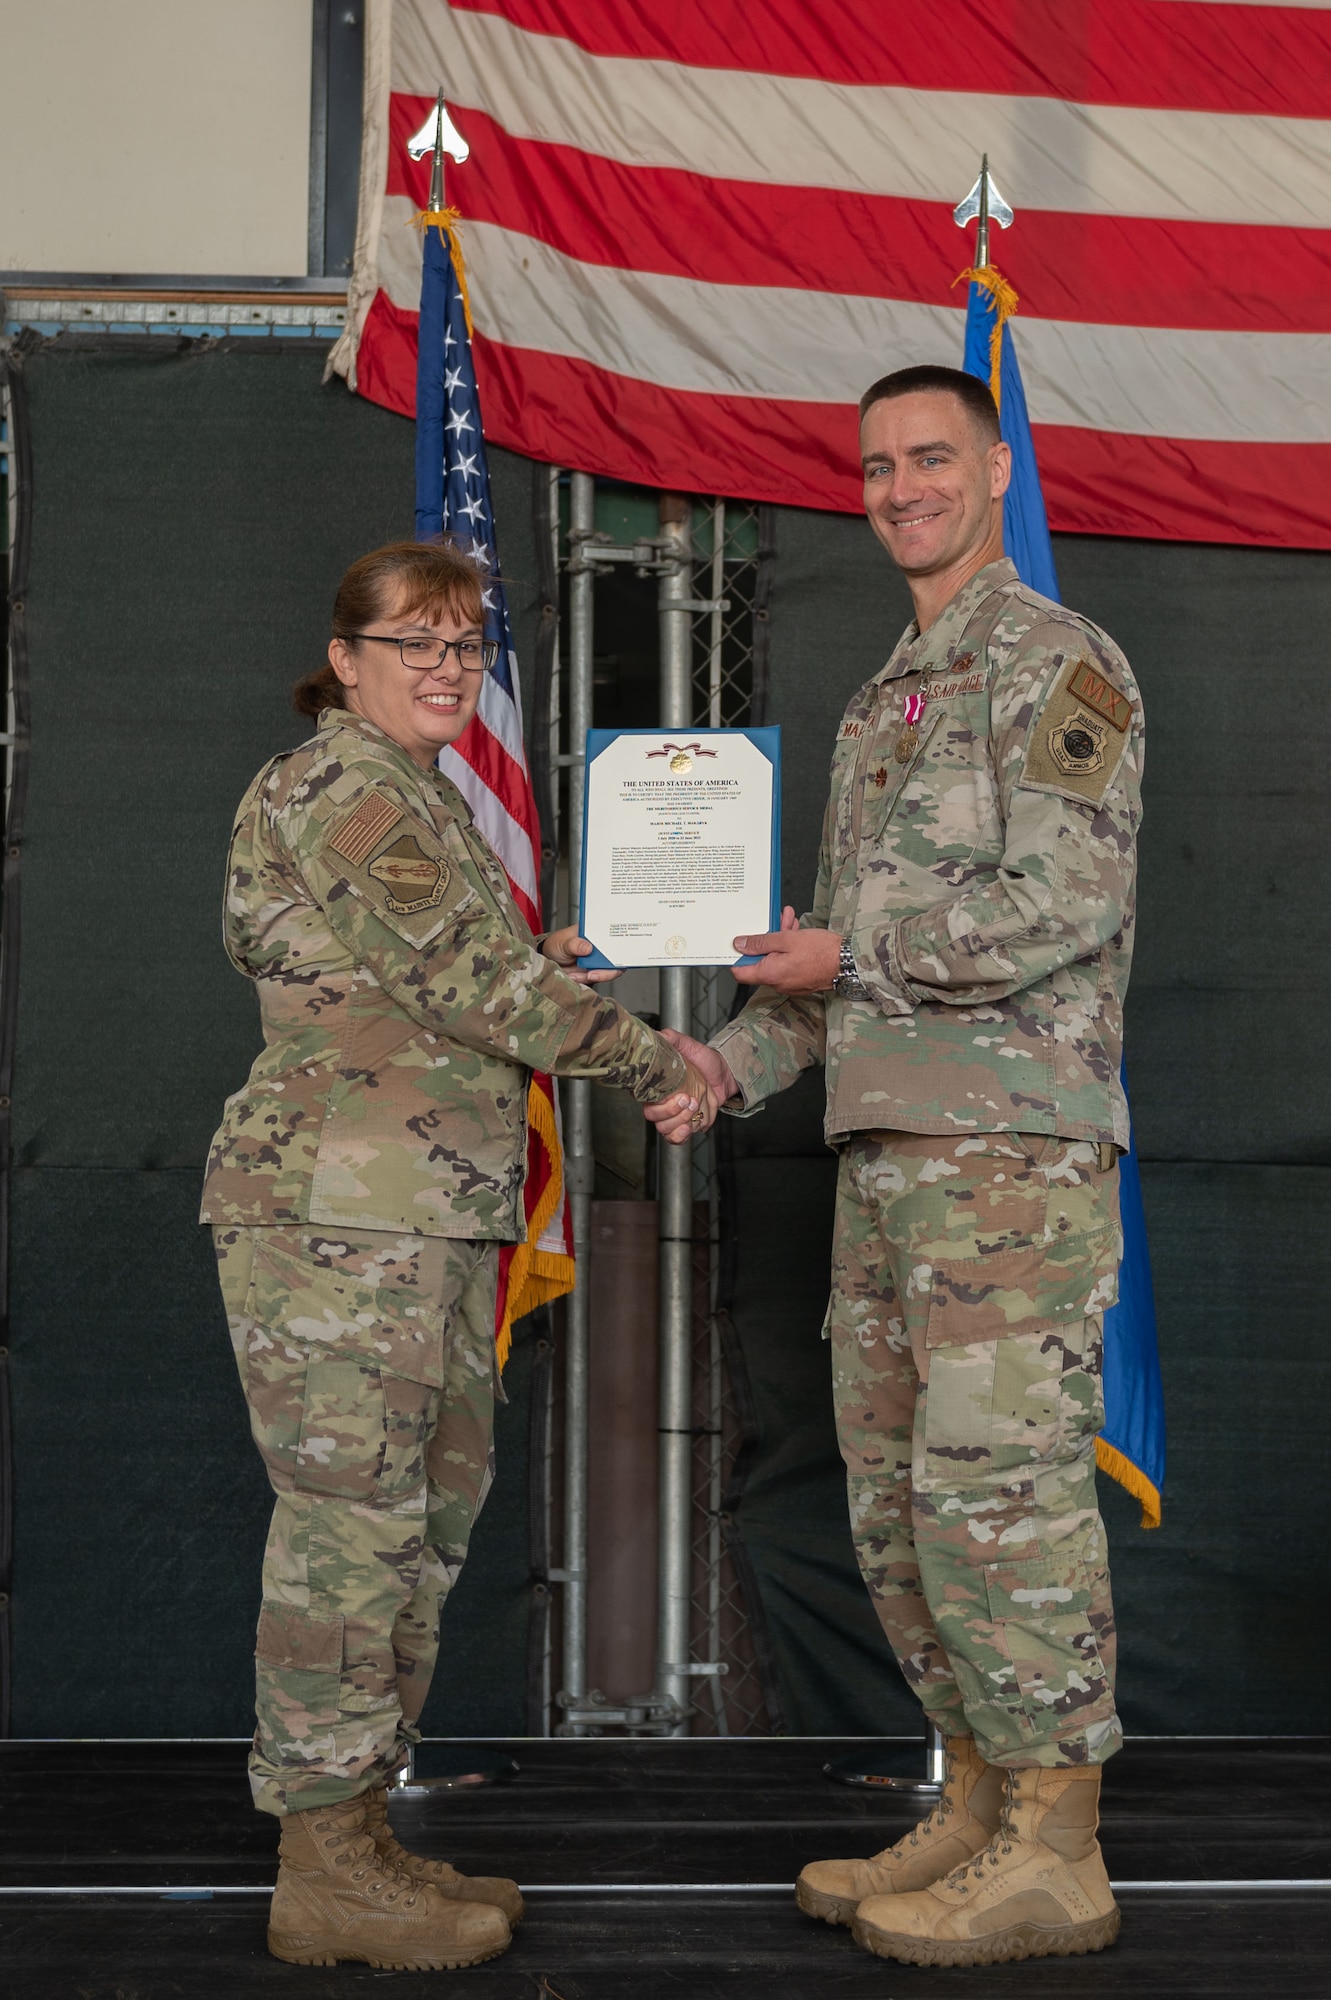 U.S. Air Force Col. Kathryn Roman, left, 4th Maintenance Group commander, awards the Meritorious Service Medal to U.S. Air Force Maj. Michael Makaryk, right, 335th Fighter Generation Squadron commander, during a change of command ceremony at Seymour Johnson Air Force Base, North Carolina, June 23, 2023. The Meritorious Service Medal is a military award presented to members of the United States Armed Forces who distinguished themselves by outstanding service. (U.S. Air Force photo by Airman 1st Class Rebecca Sirimarco-Lang)